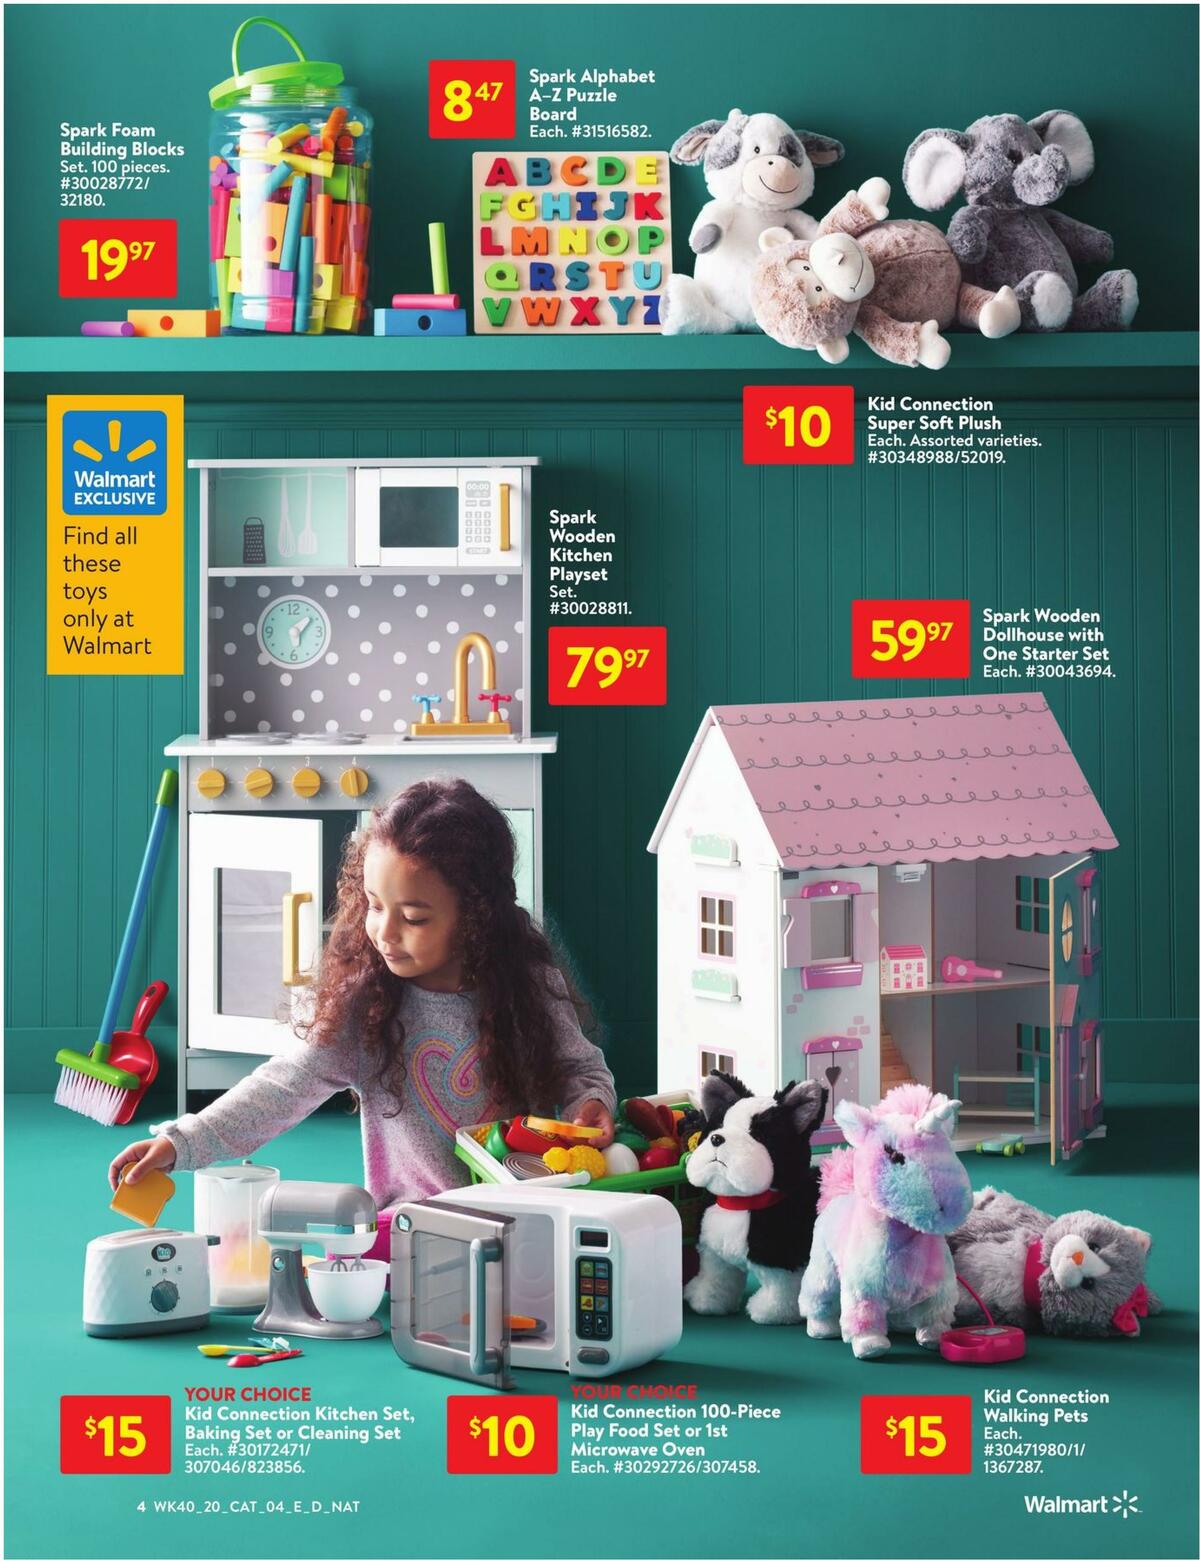 Walmart Toy Shop Flyer from October 29